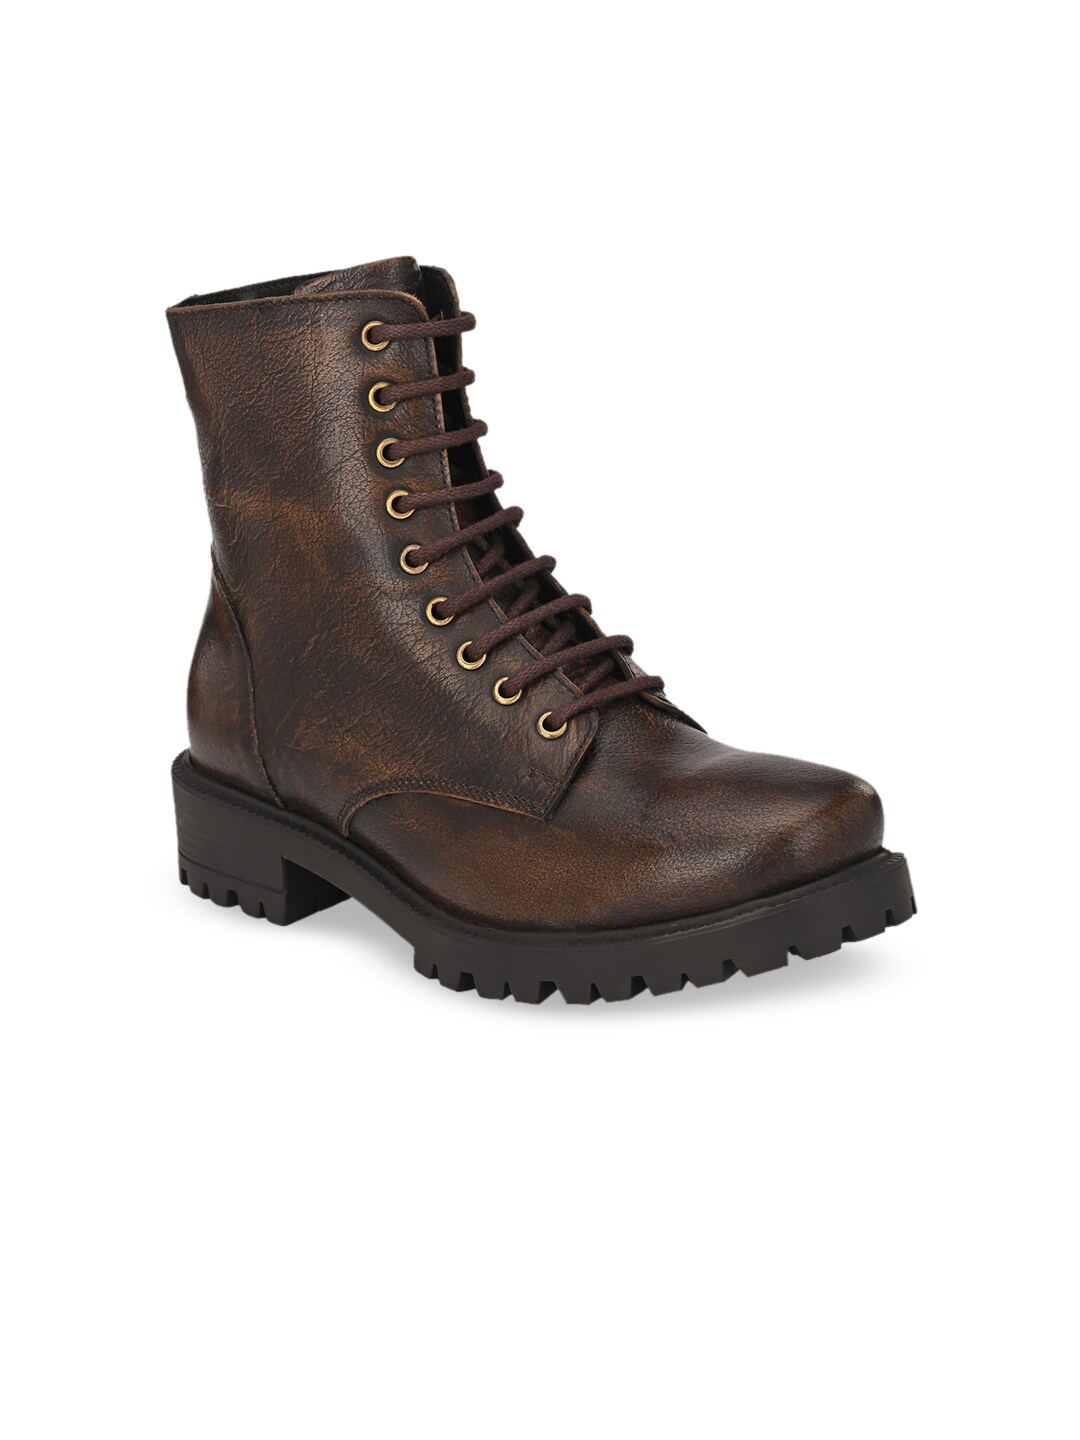 CARLO ROMANO Women Brown Solid Leather High-Top Flat Boots Price in India